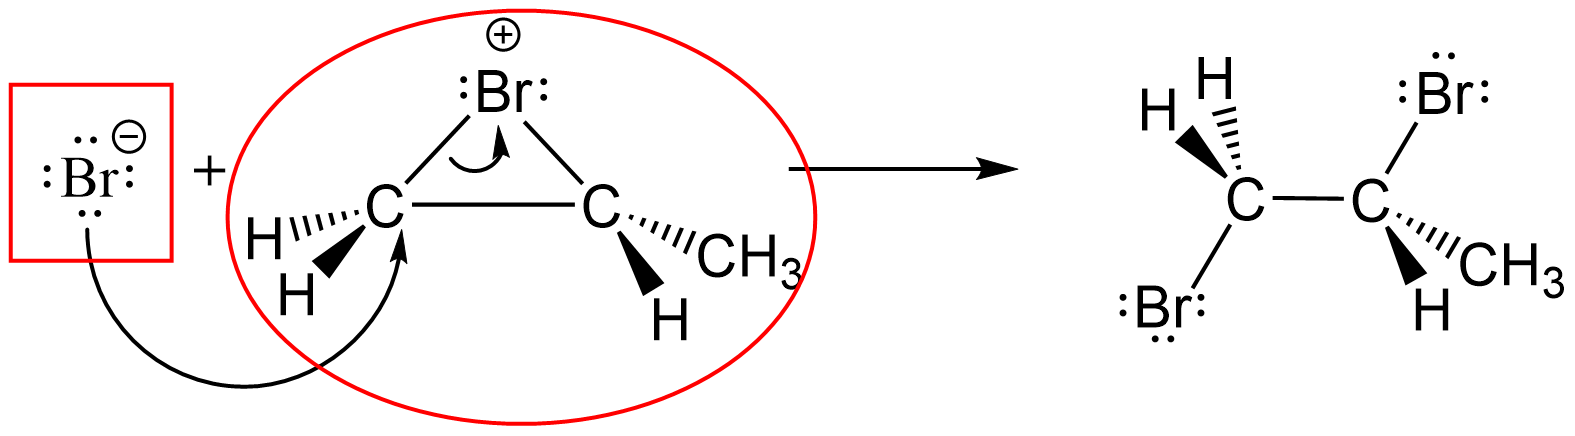 In the reaction of Br- anion with CH2(Br+)C(H)CH3 bromonium cation, forming 1,2-dibromopropane (CH2BrCHBrCH3), a rectangle is drawn around Br- anion and an oval is drawn around the bromonium cation.